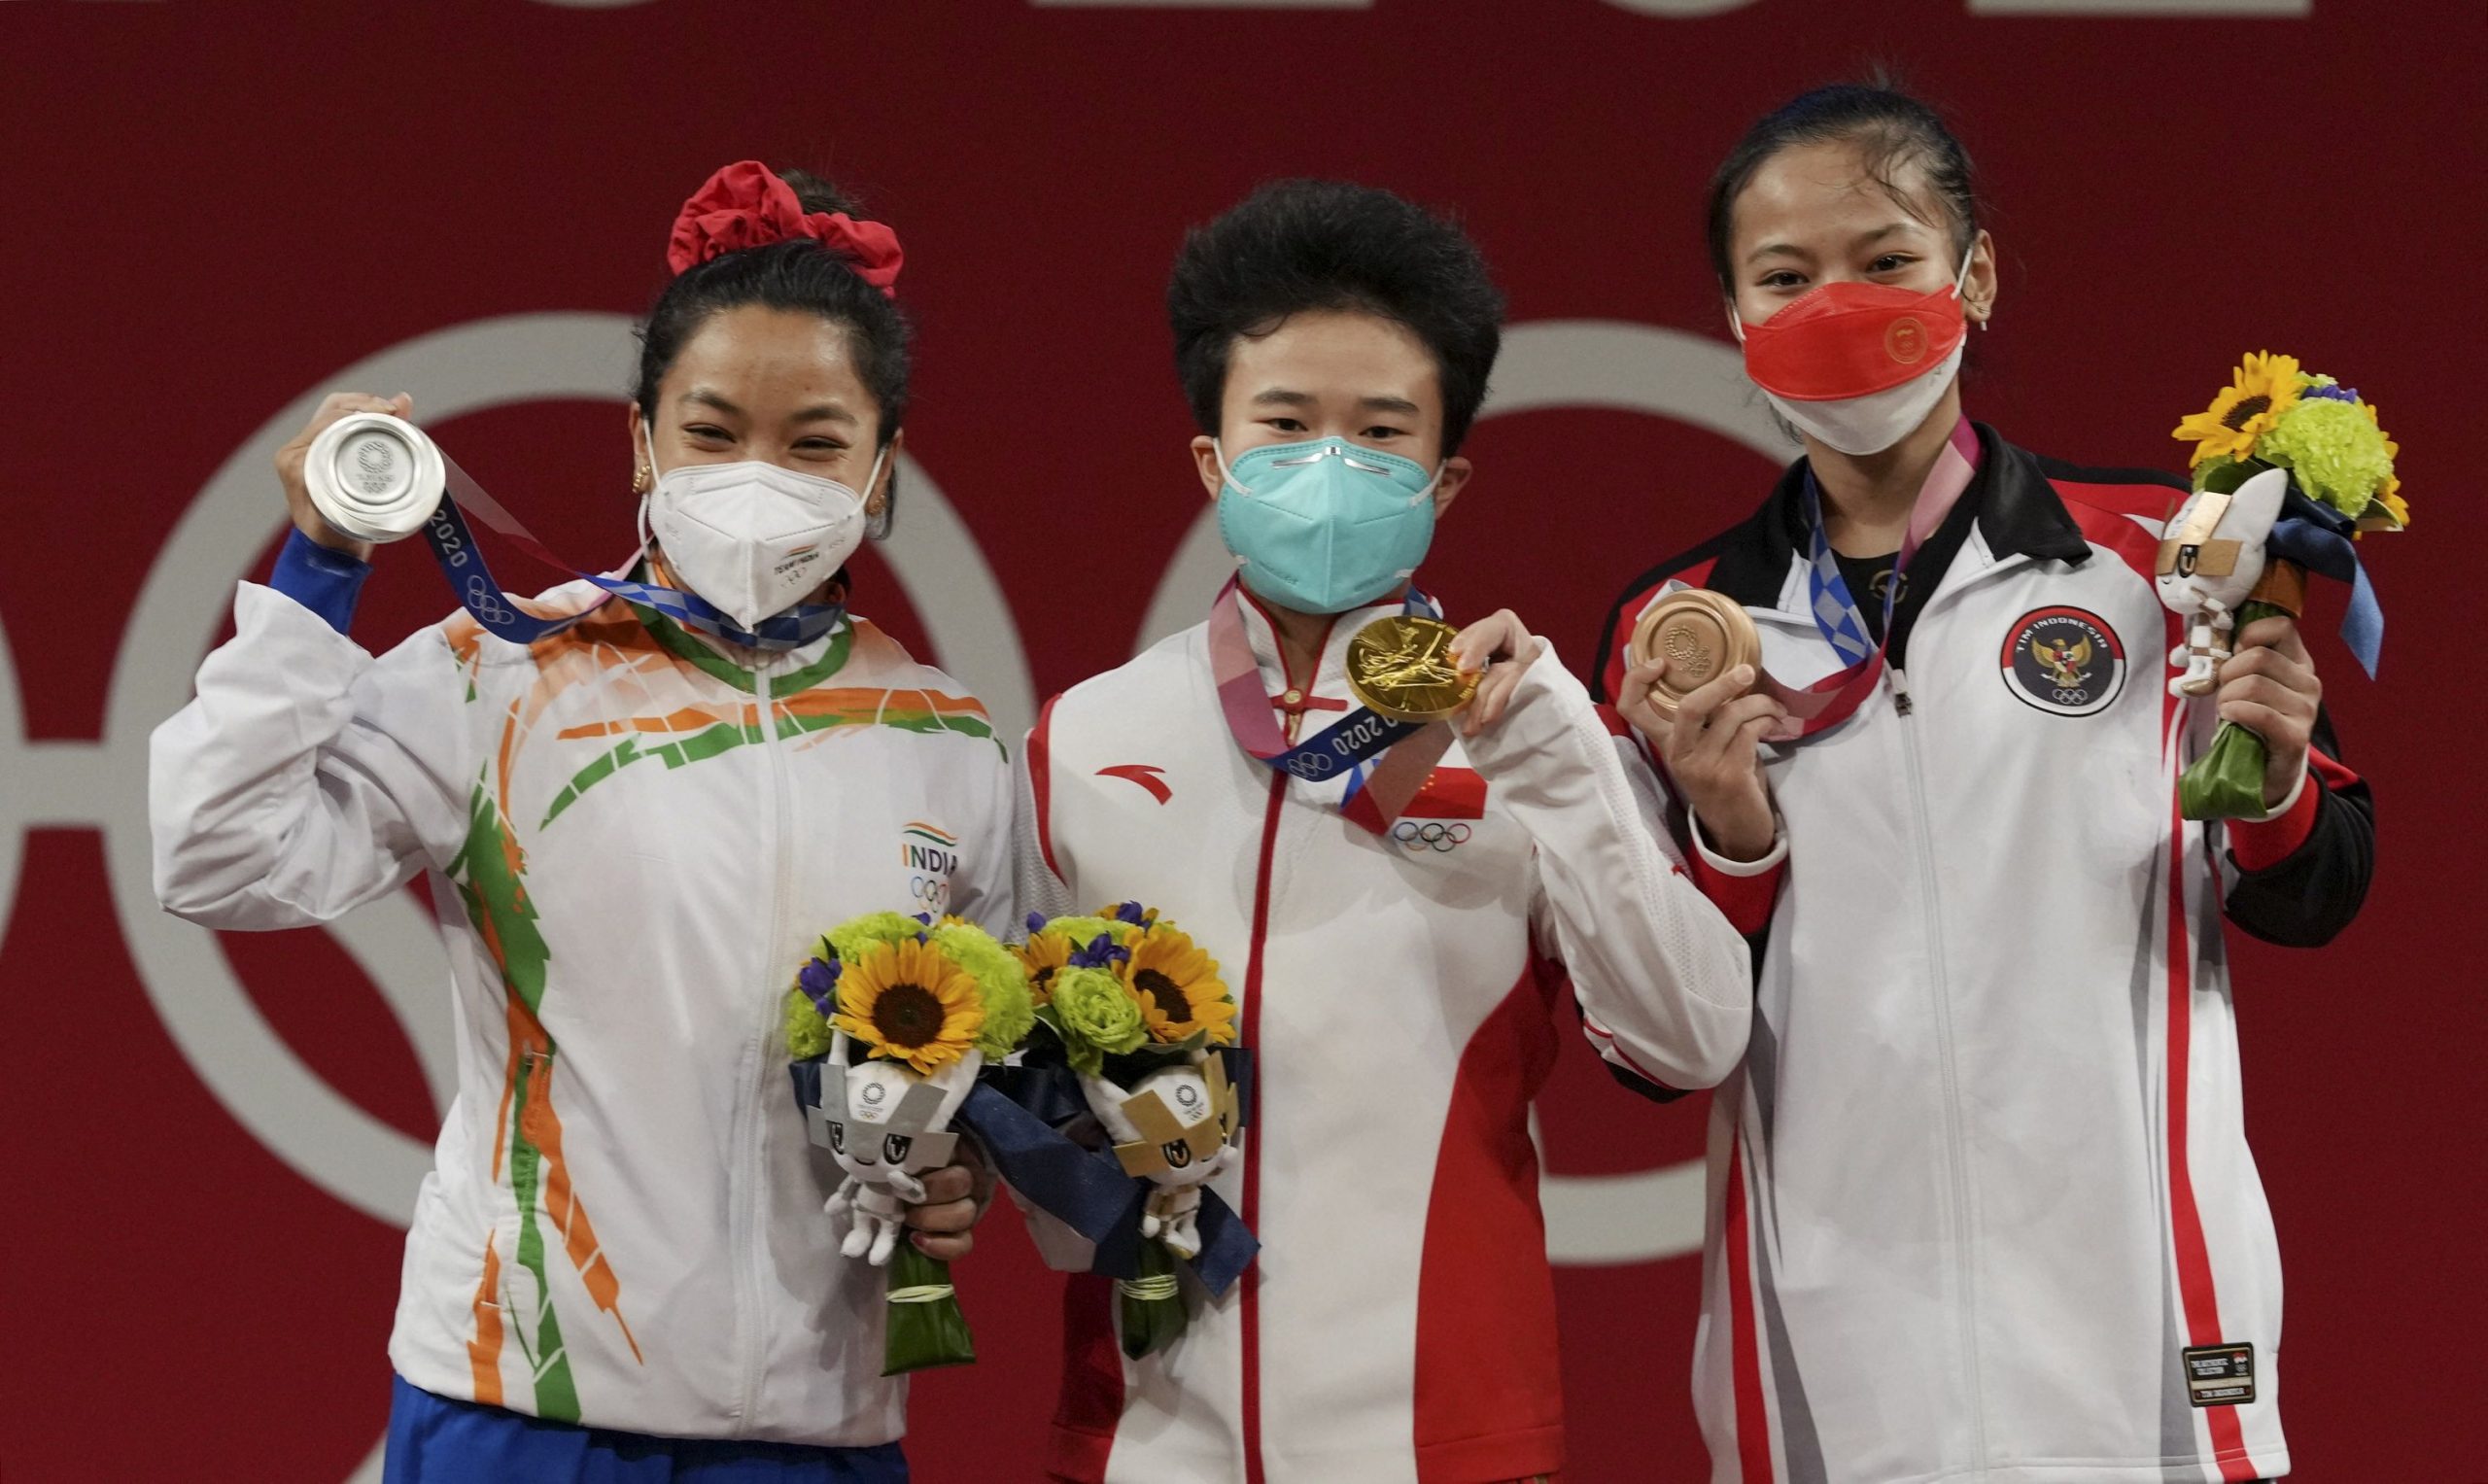 Tokyo Olympics: Story behind winners’ flowers that pay tribute to 2011 disaster